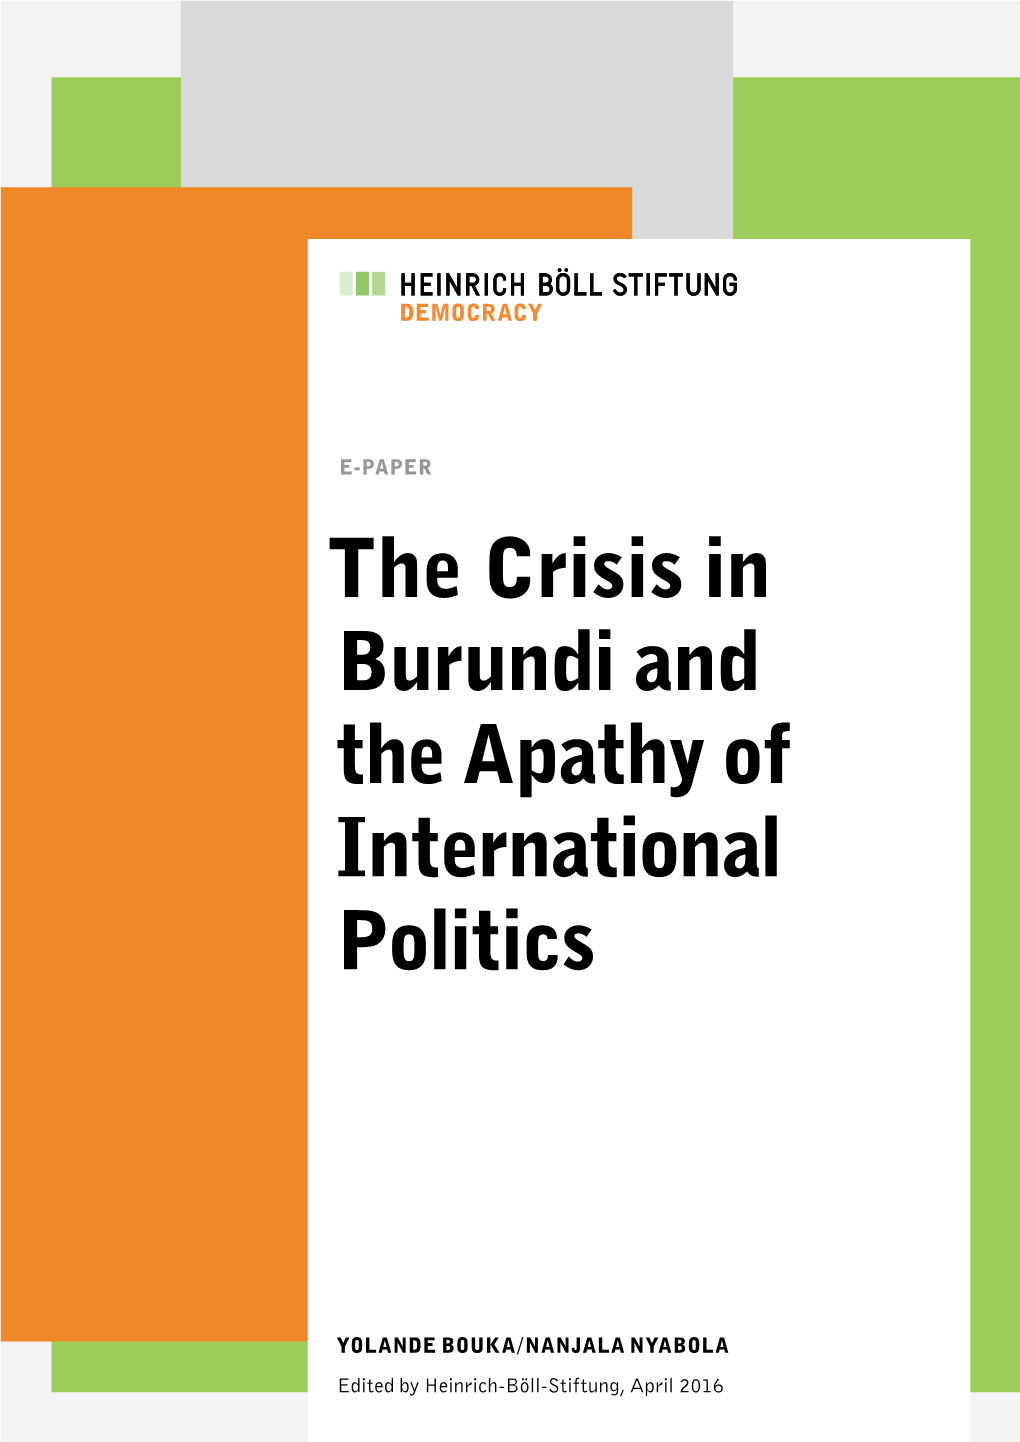 The Crisis in Burundi and the Apathy of International Politics